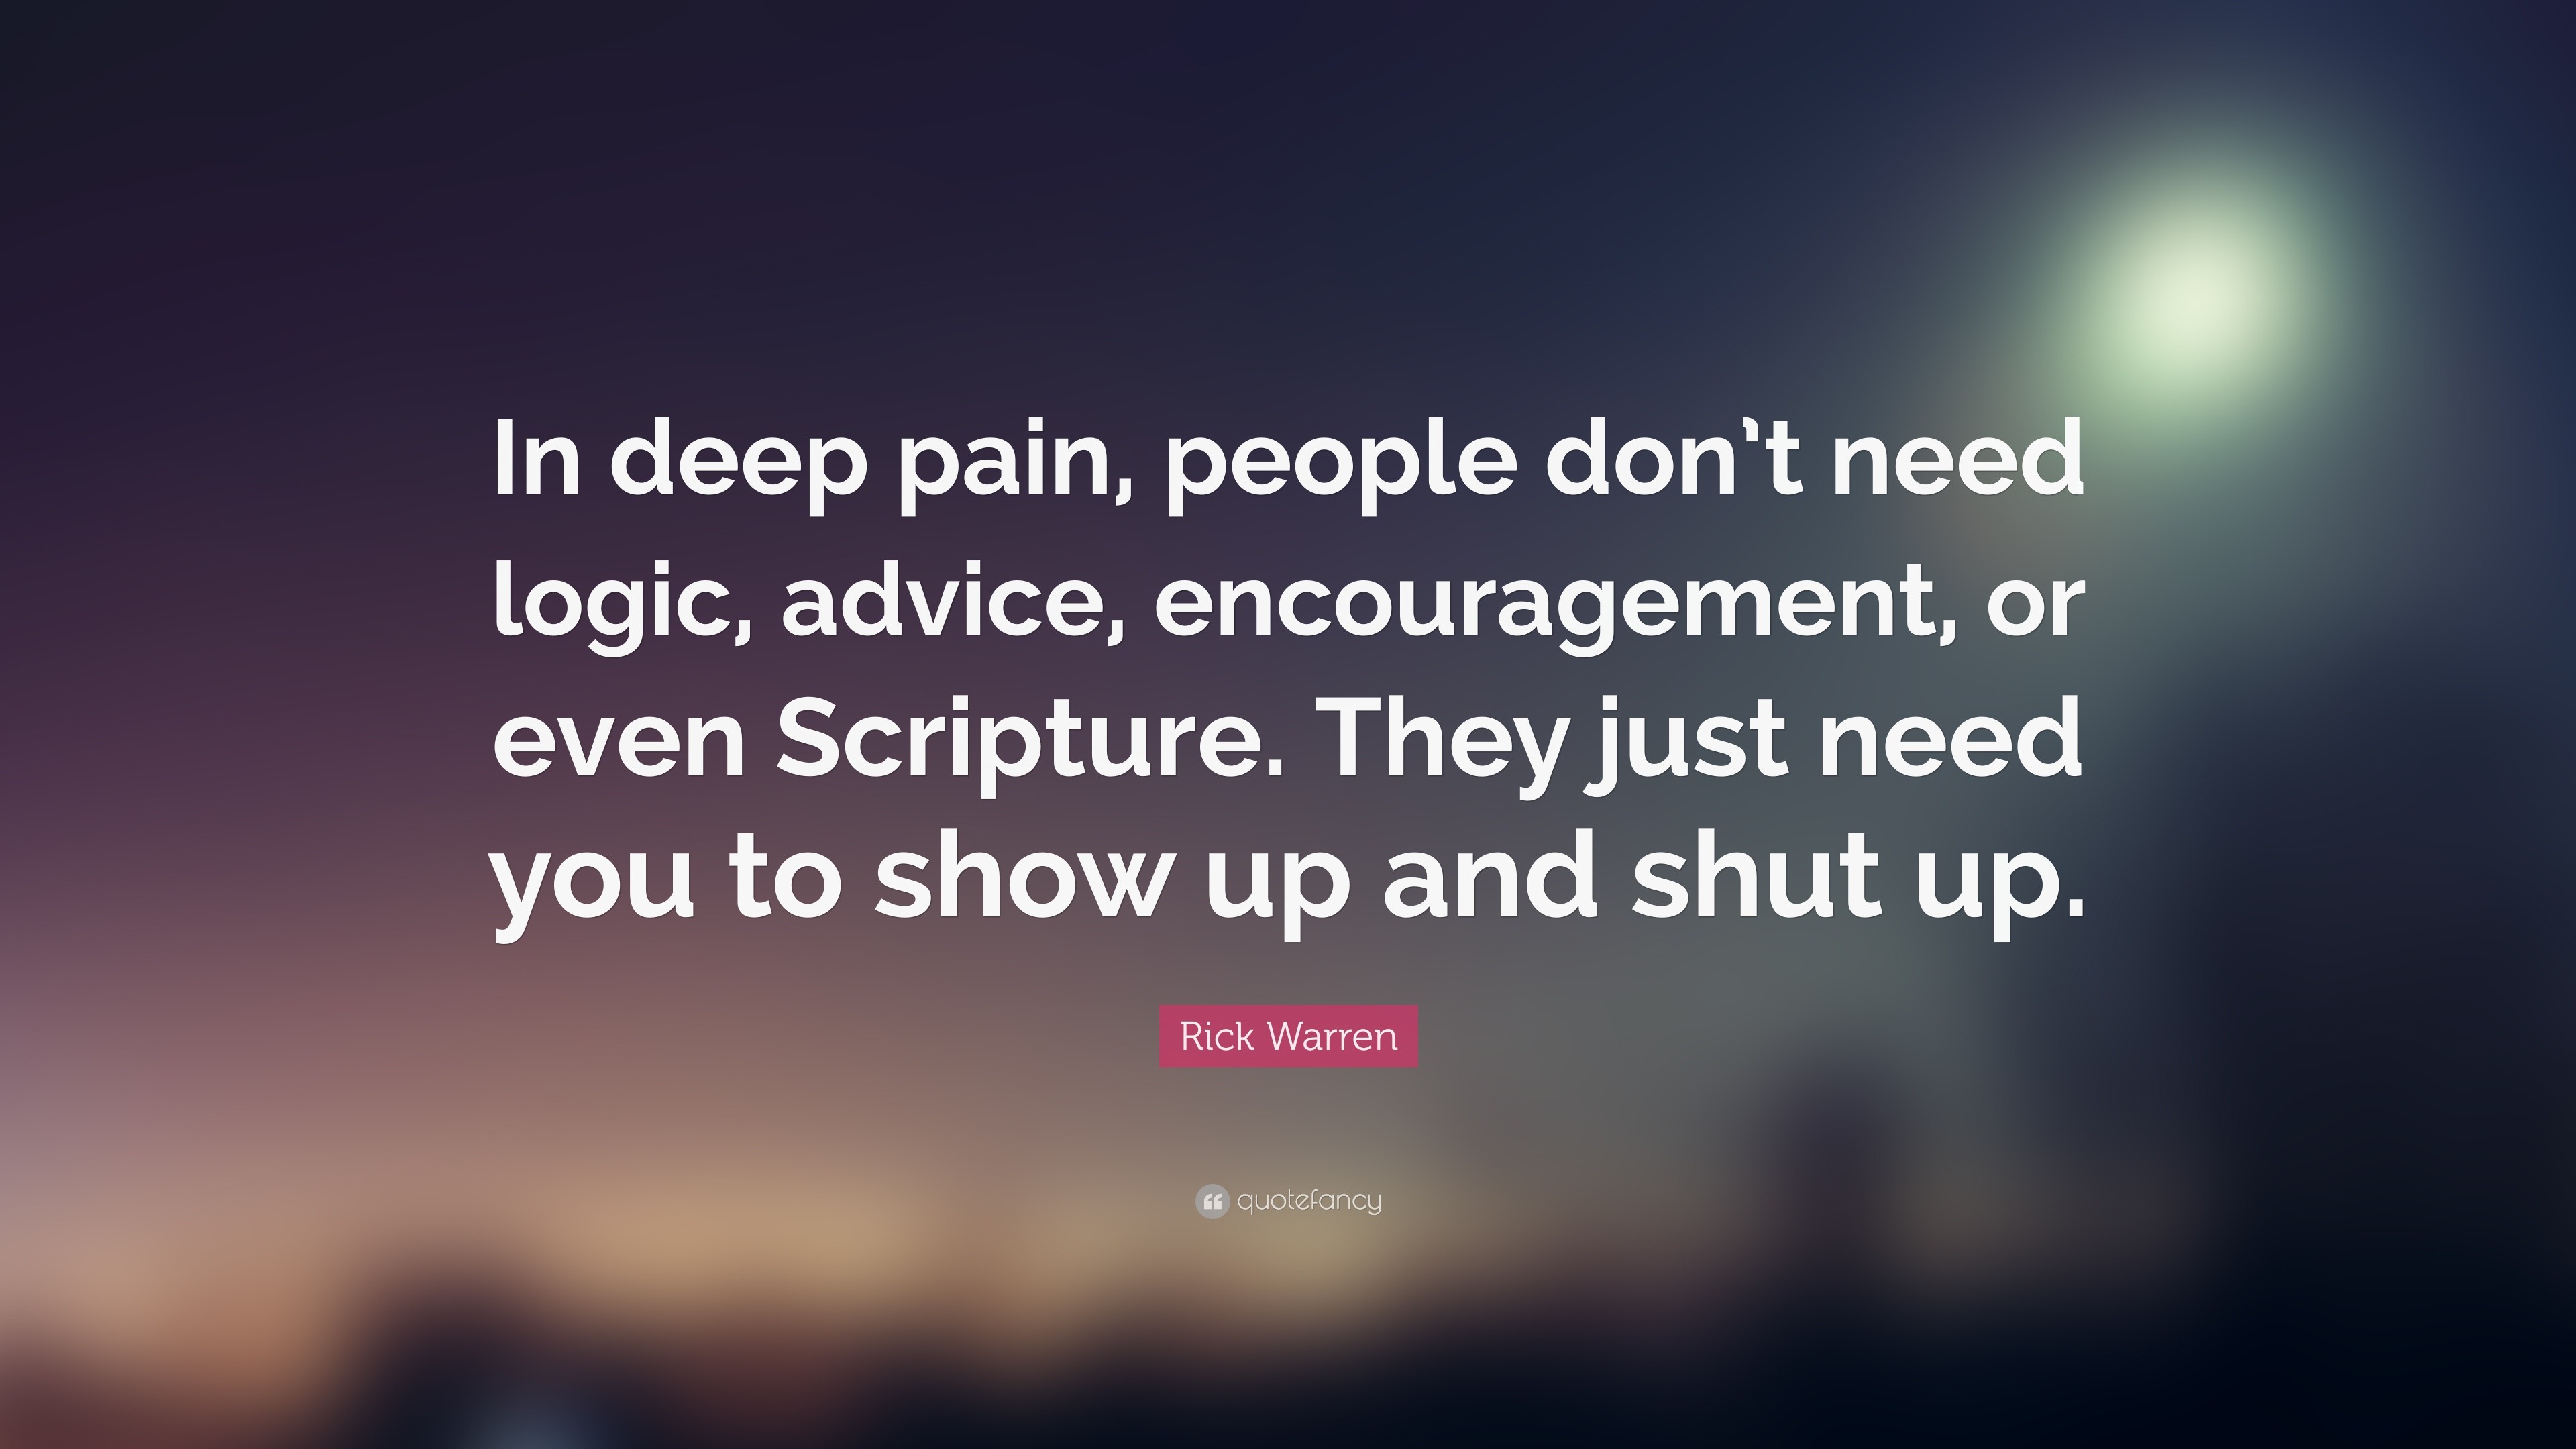 Rick Warren Quote: "In deep pain, people don't need logic ...